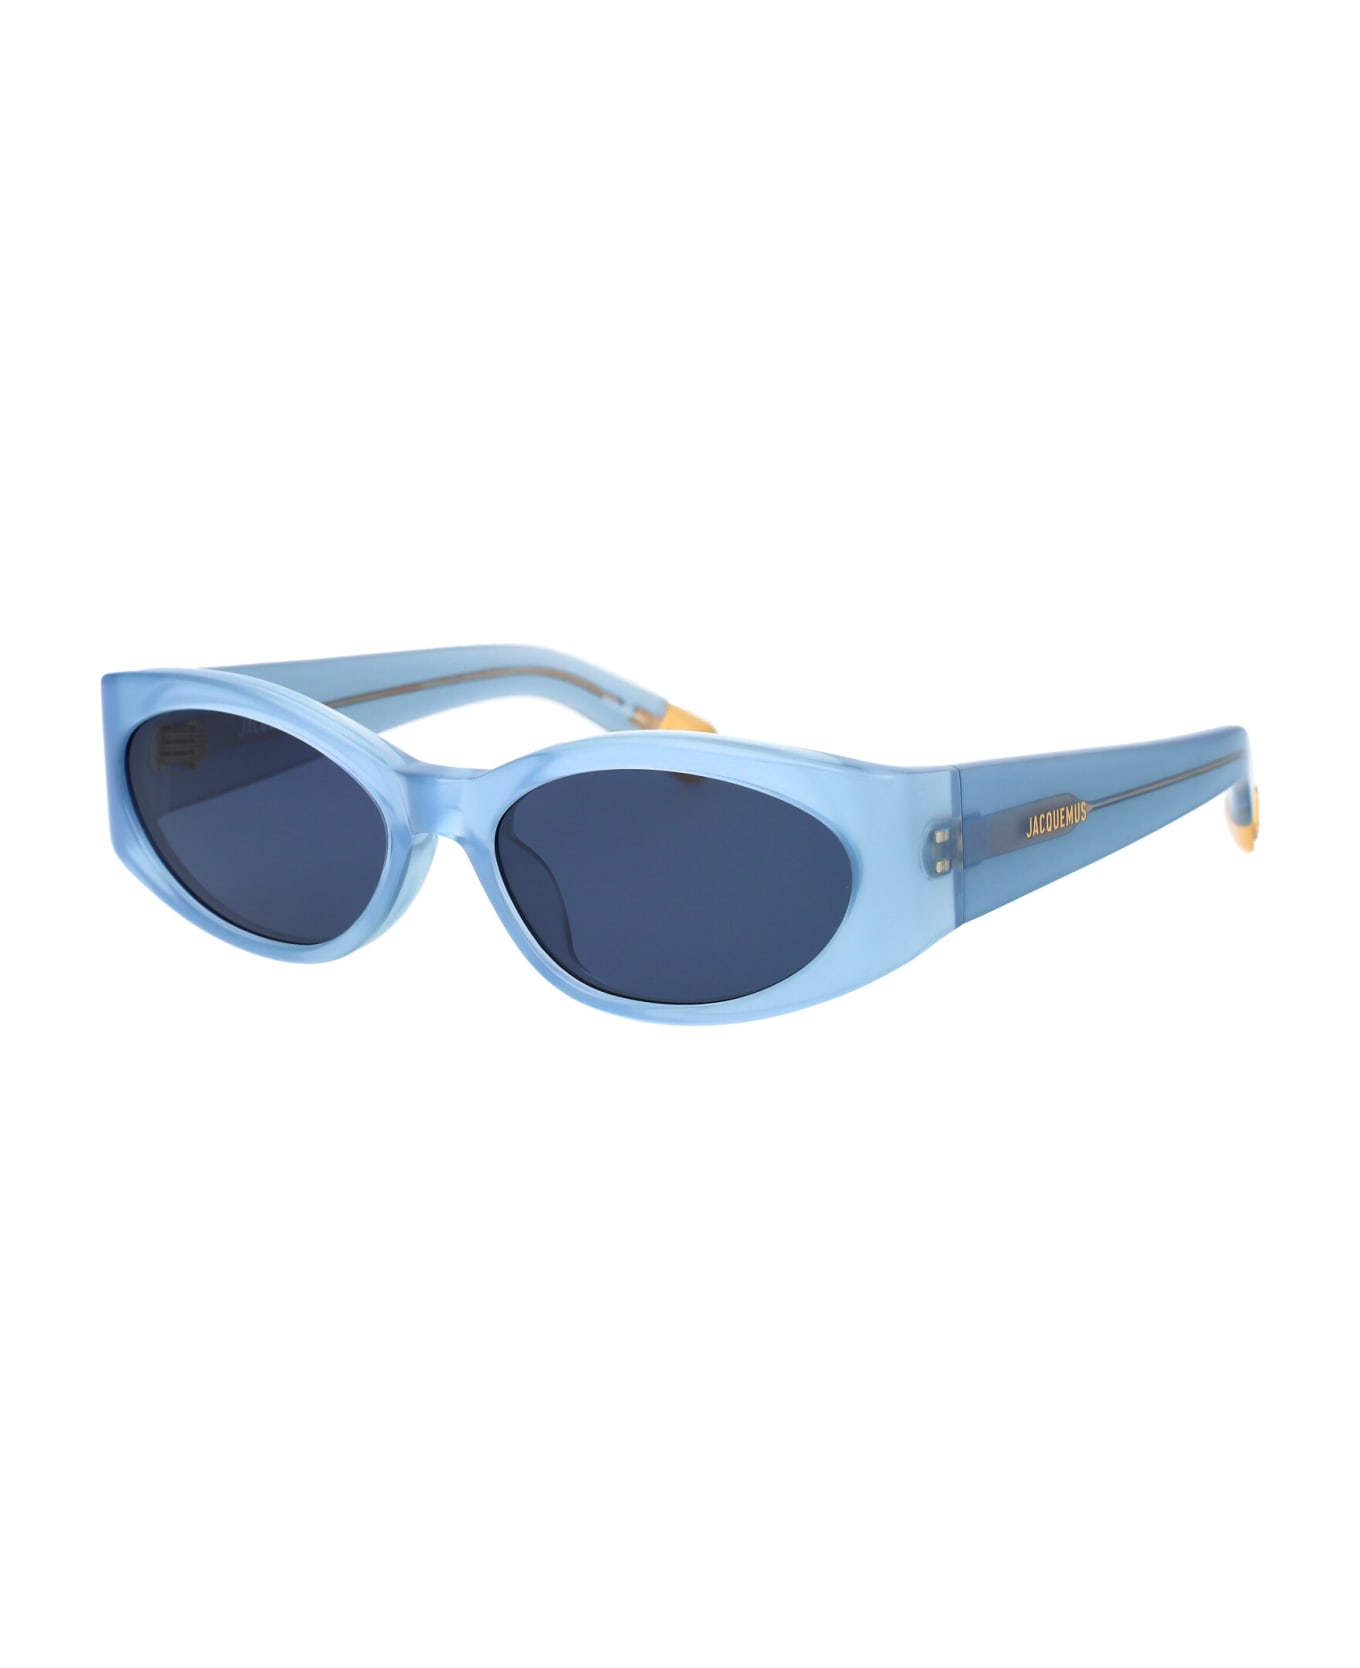 Jacquemus Ovalo Sunglasses - 05 BLUE PEARL/ YELLOW GOLD/ GREEN